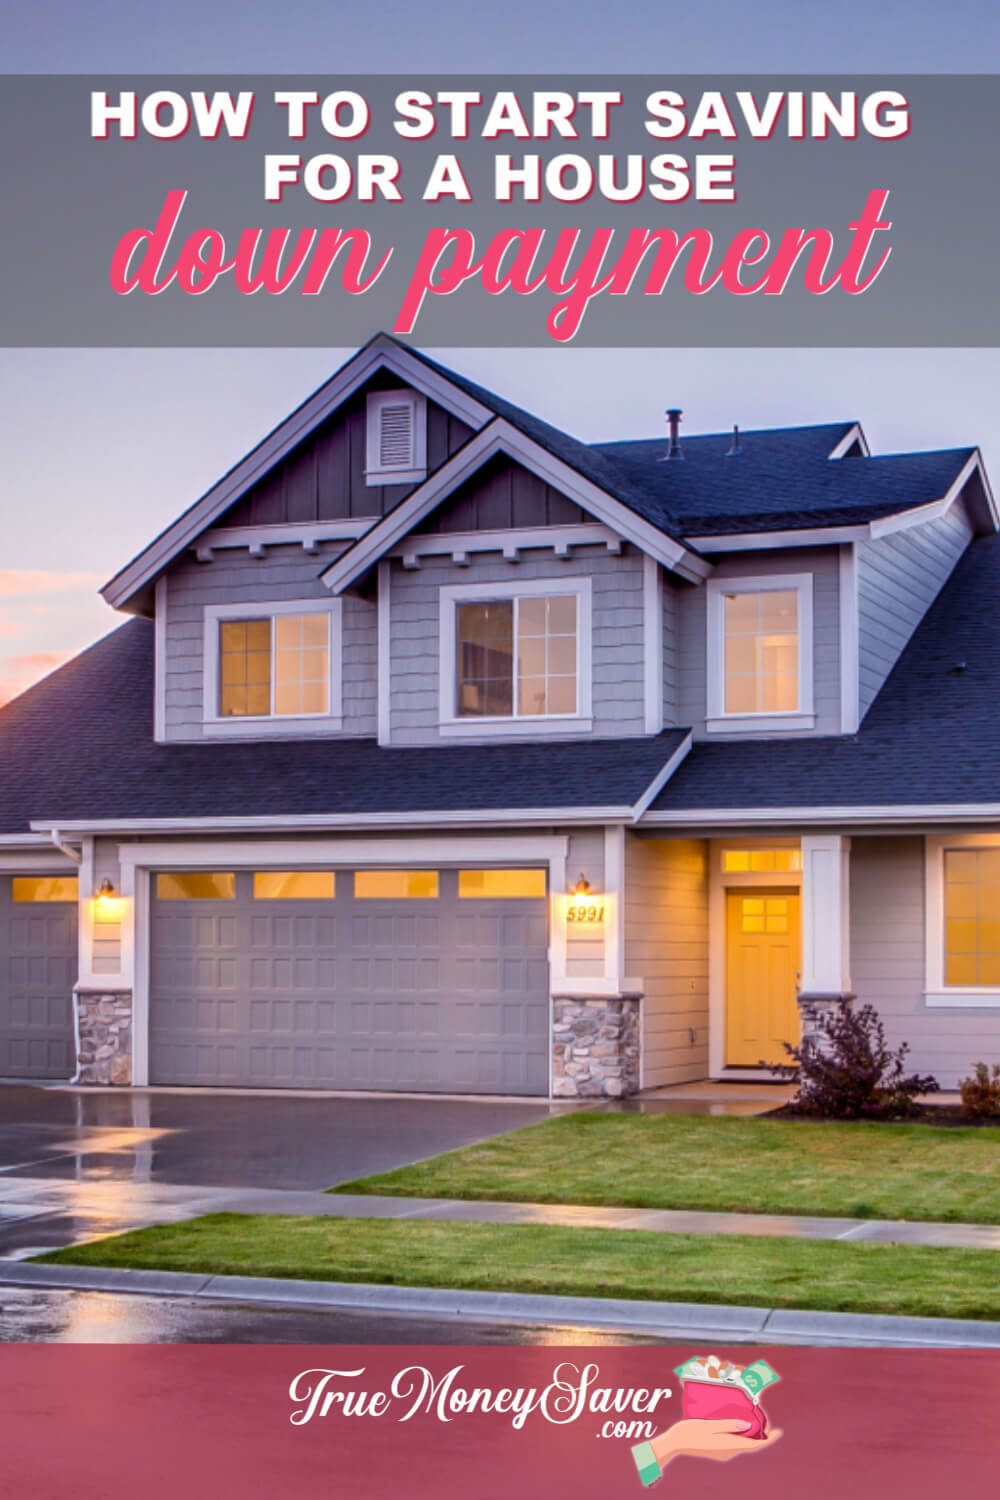 How To Start Saving For A House Down Payment Now